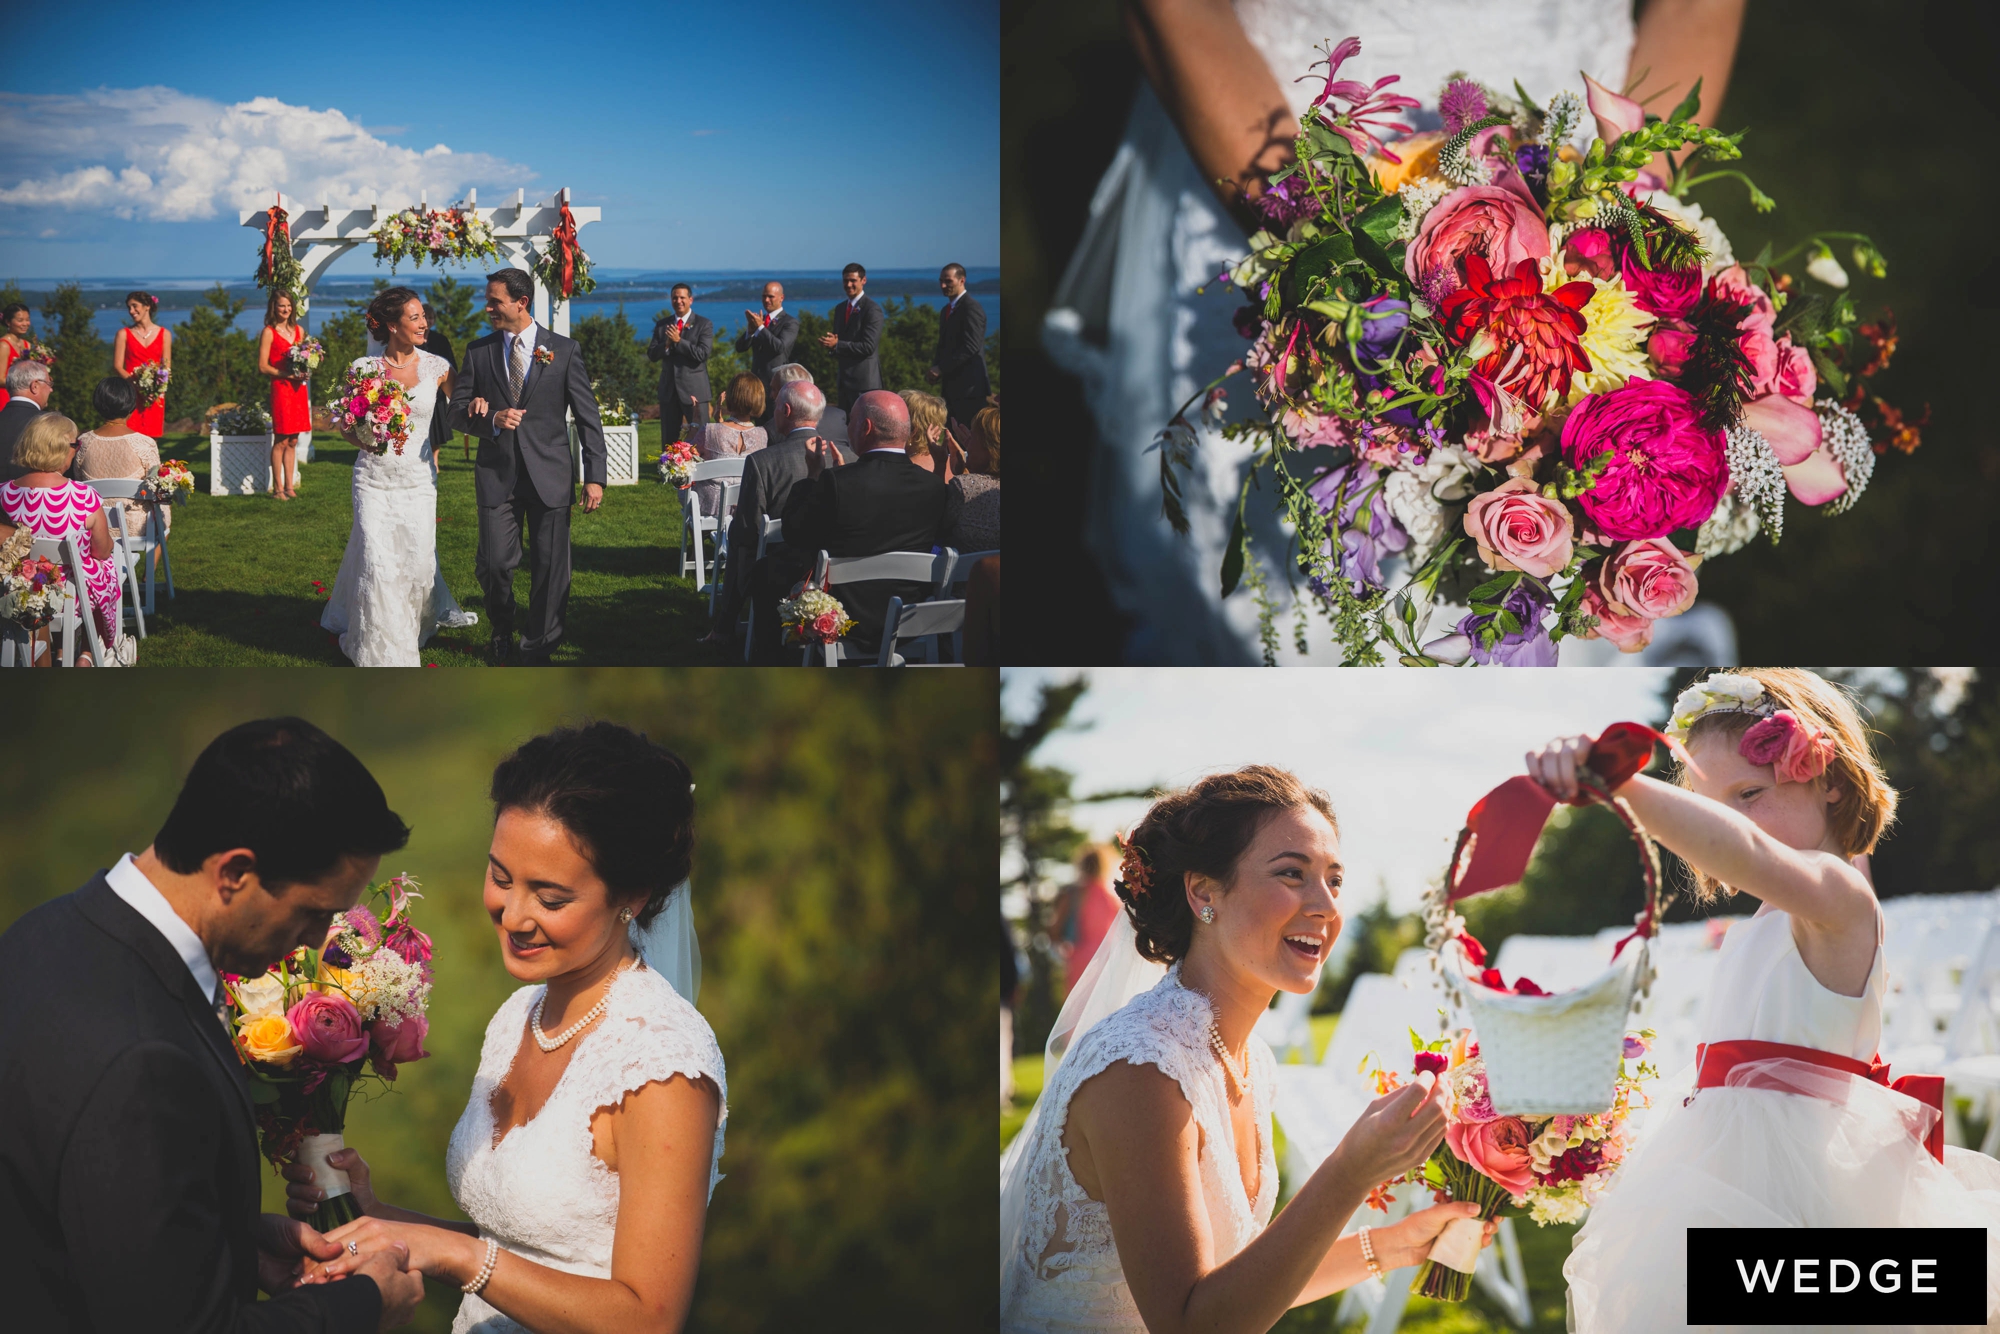 Point Lookout Wedding Sneak Peek: Jenny & Monte (Lincolnville, Maine). A wedding ceremony & reception at Point Lookout Resort in Lincolnville, Maine. Photographs by The award winning photographers at Boathouse Studios.